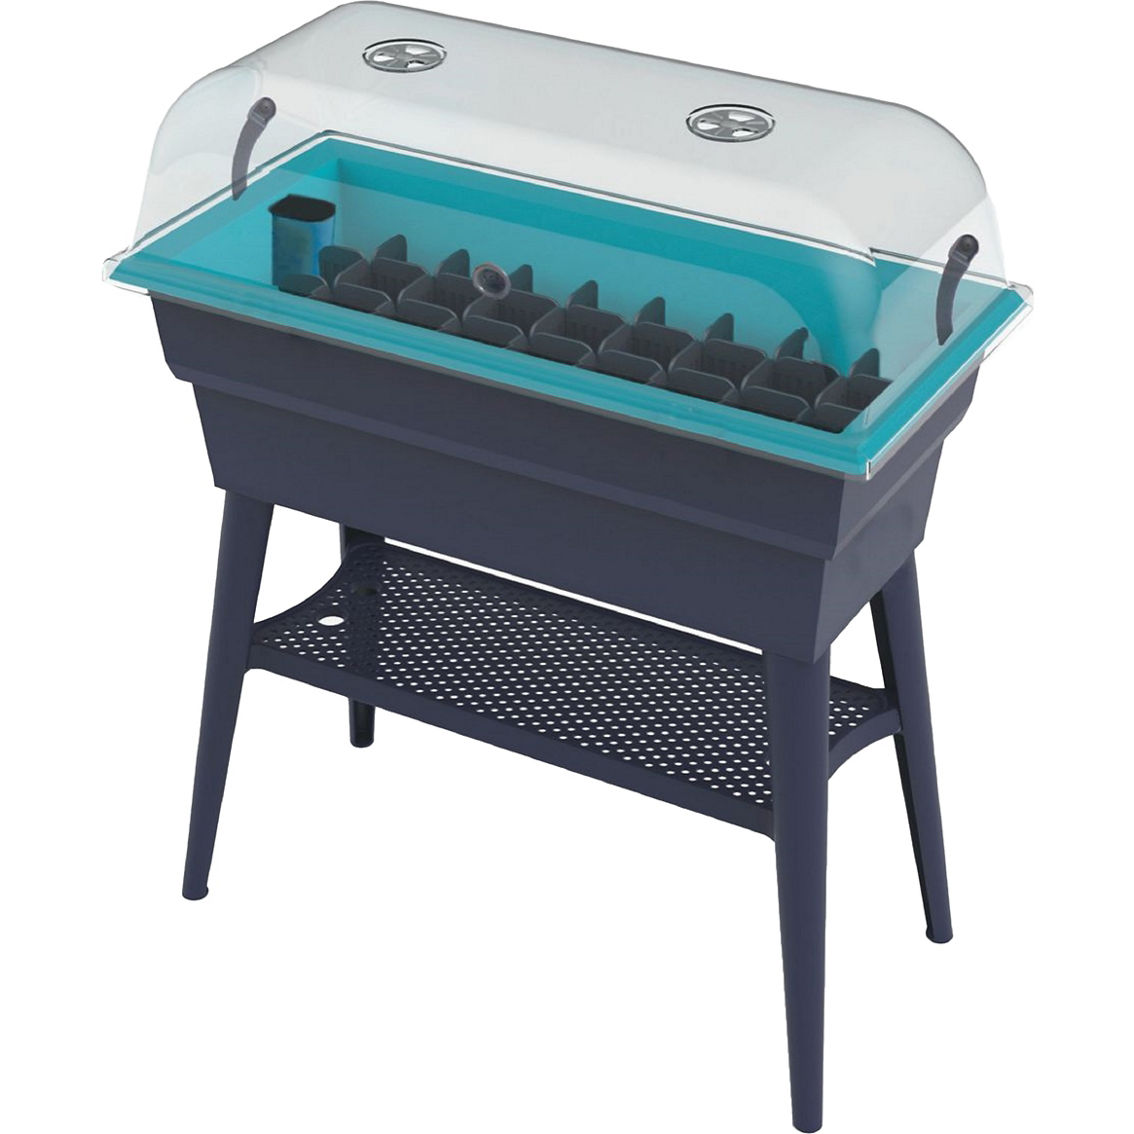 Bosmere Combi 32 x 15 x 39 in. Self-Watering Plastic Raised Garden Bed with Lid - Image 1 of 5